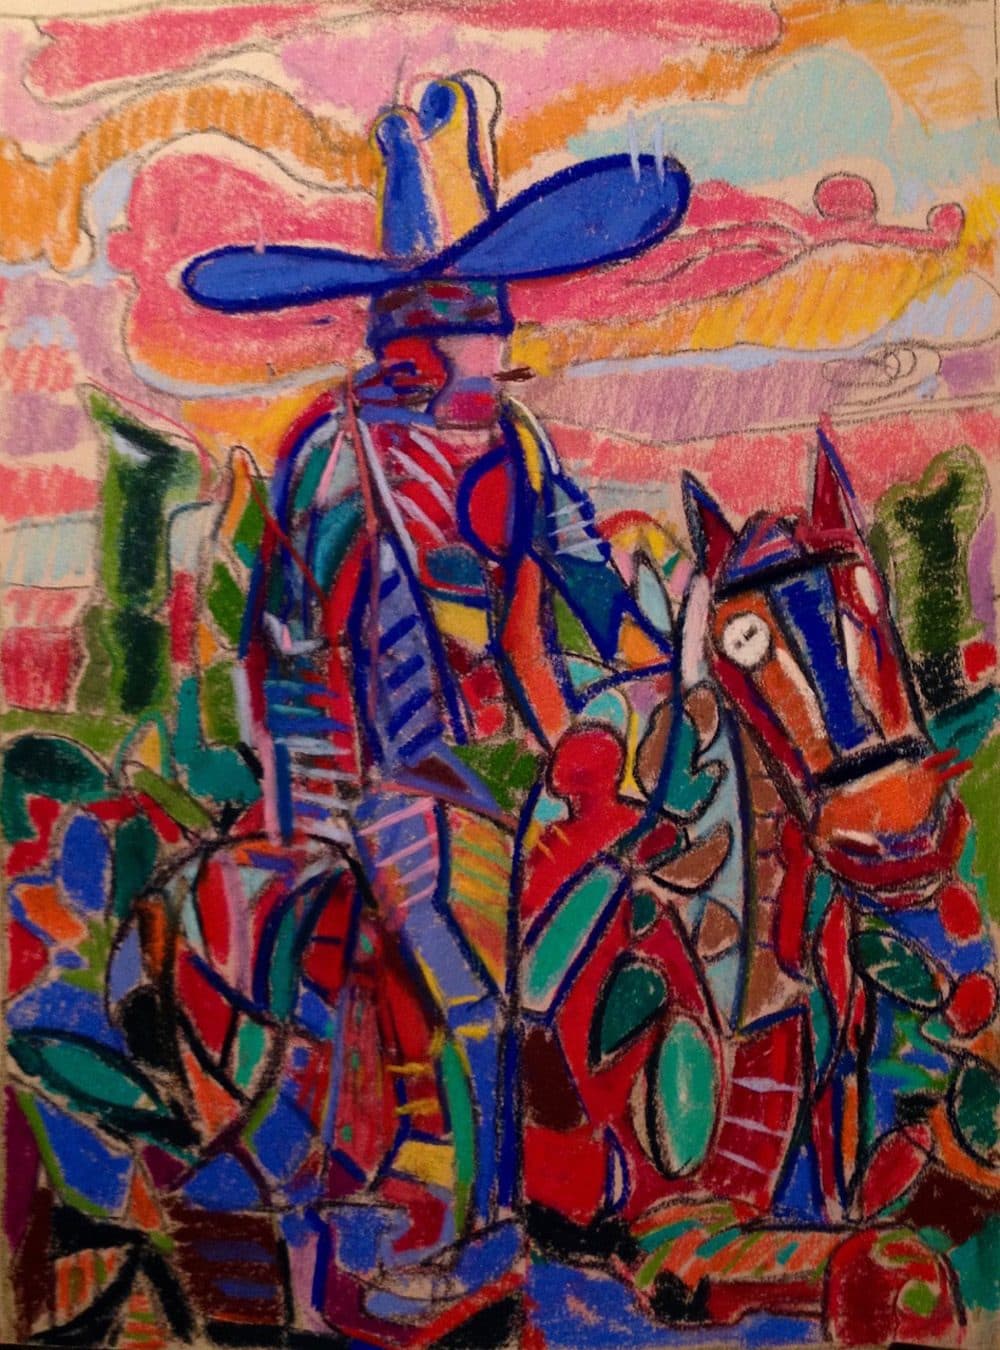 Enrique Flores-Galbis' &quot;Pancho,&quot; painted with pastel on archival canson paper in 2017. (Courtesy of Gallery Oh!)